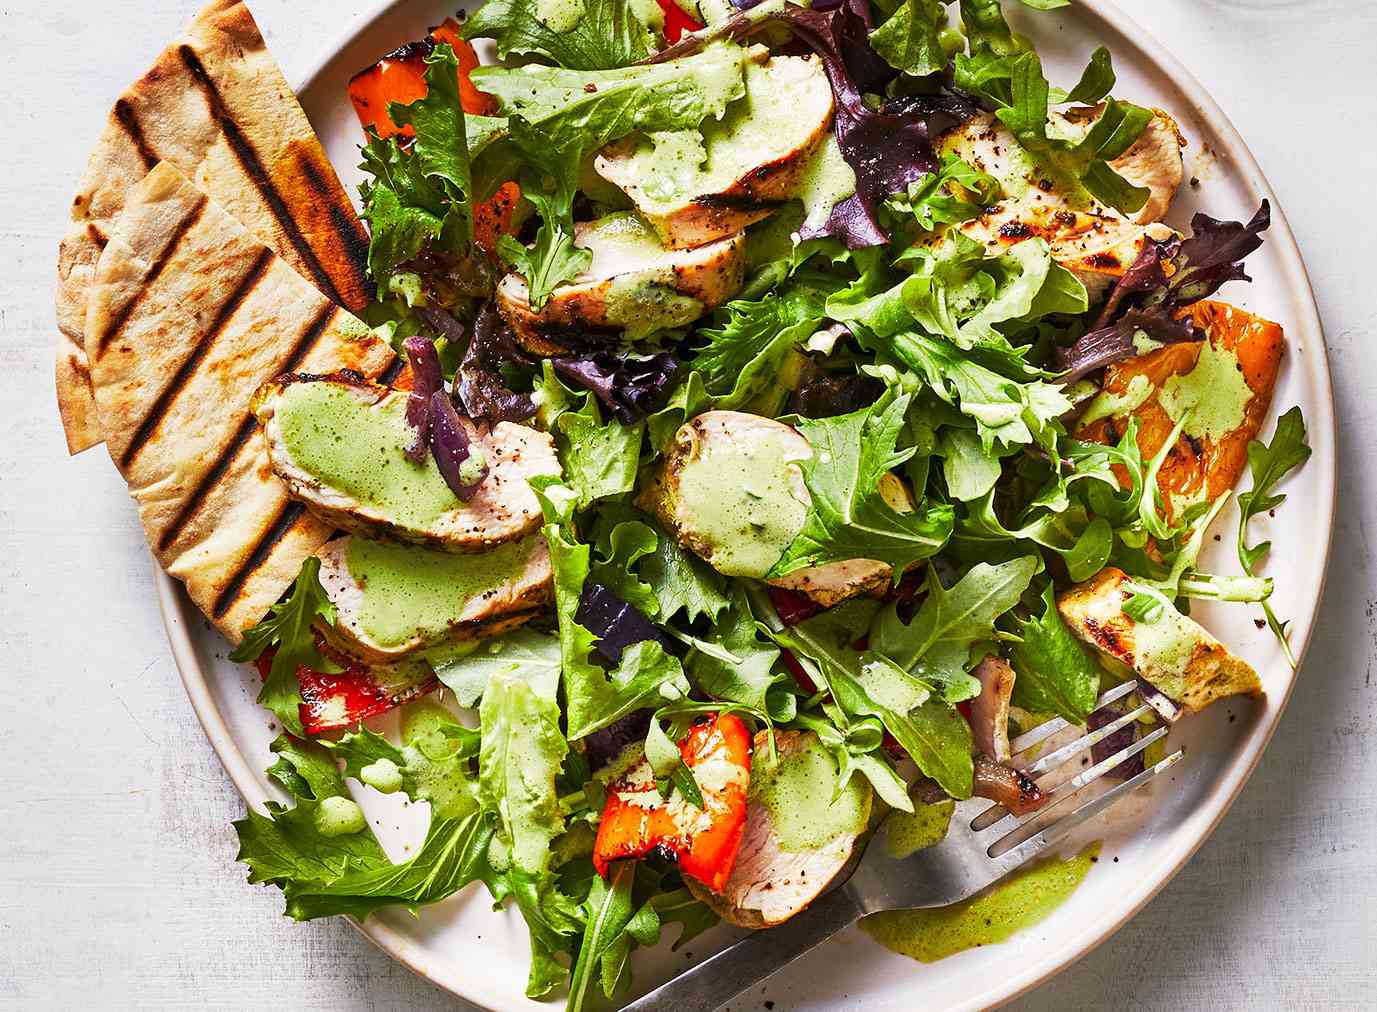 Easy chicken recipes - Grilled Chicken and Pepper Salad